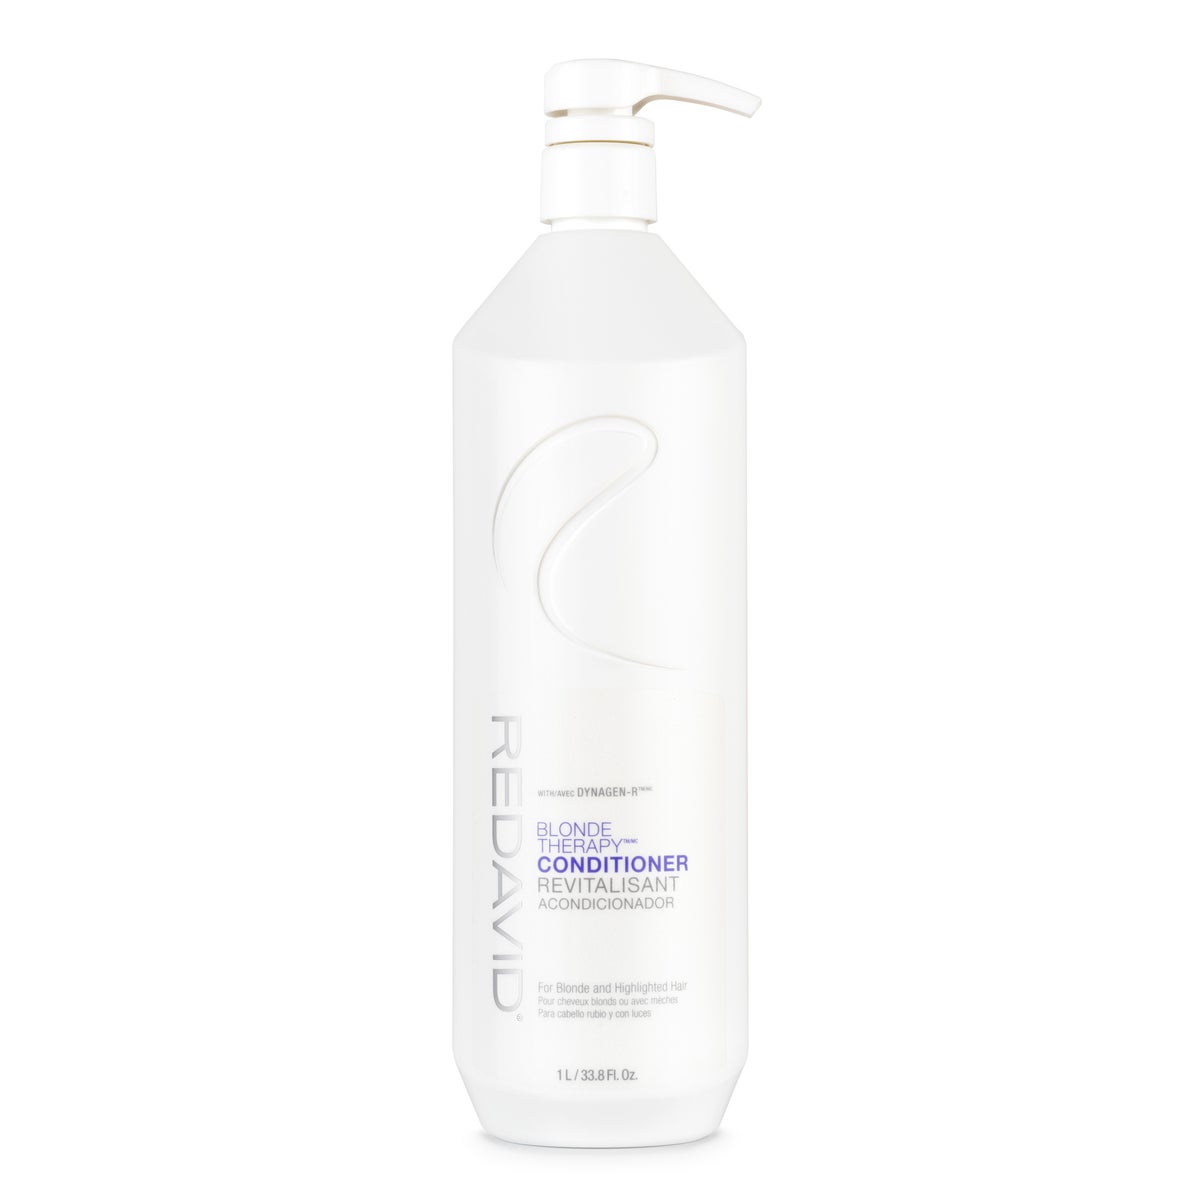 BLONDE THERAPY CONDITIONER LITRE